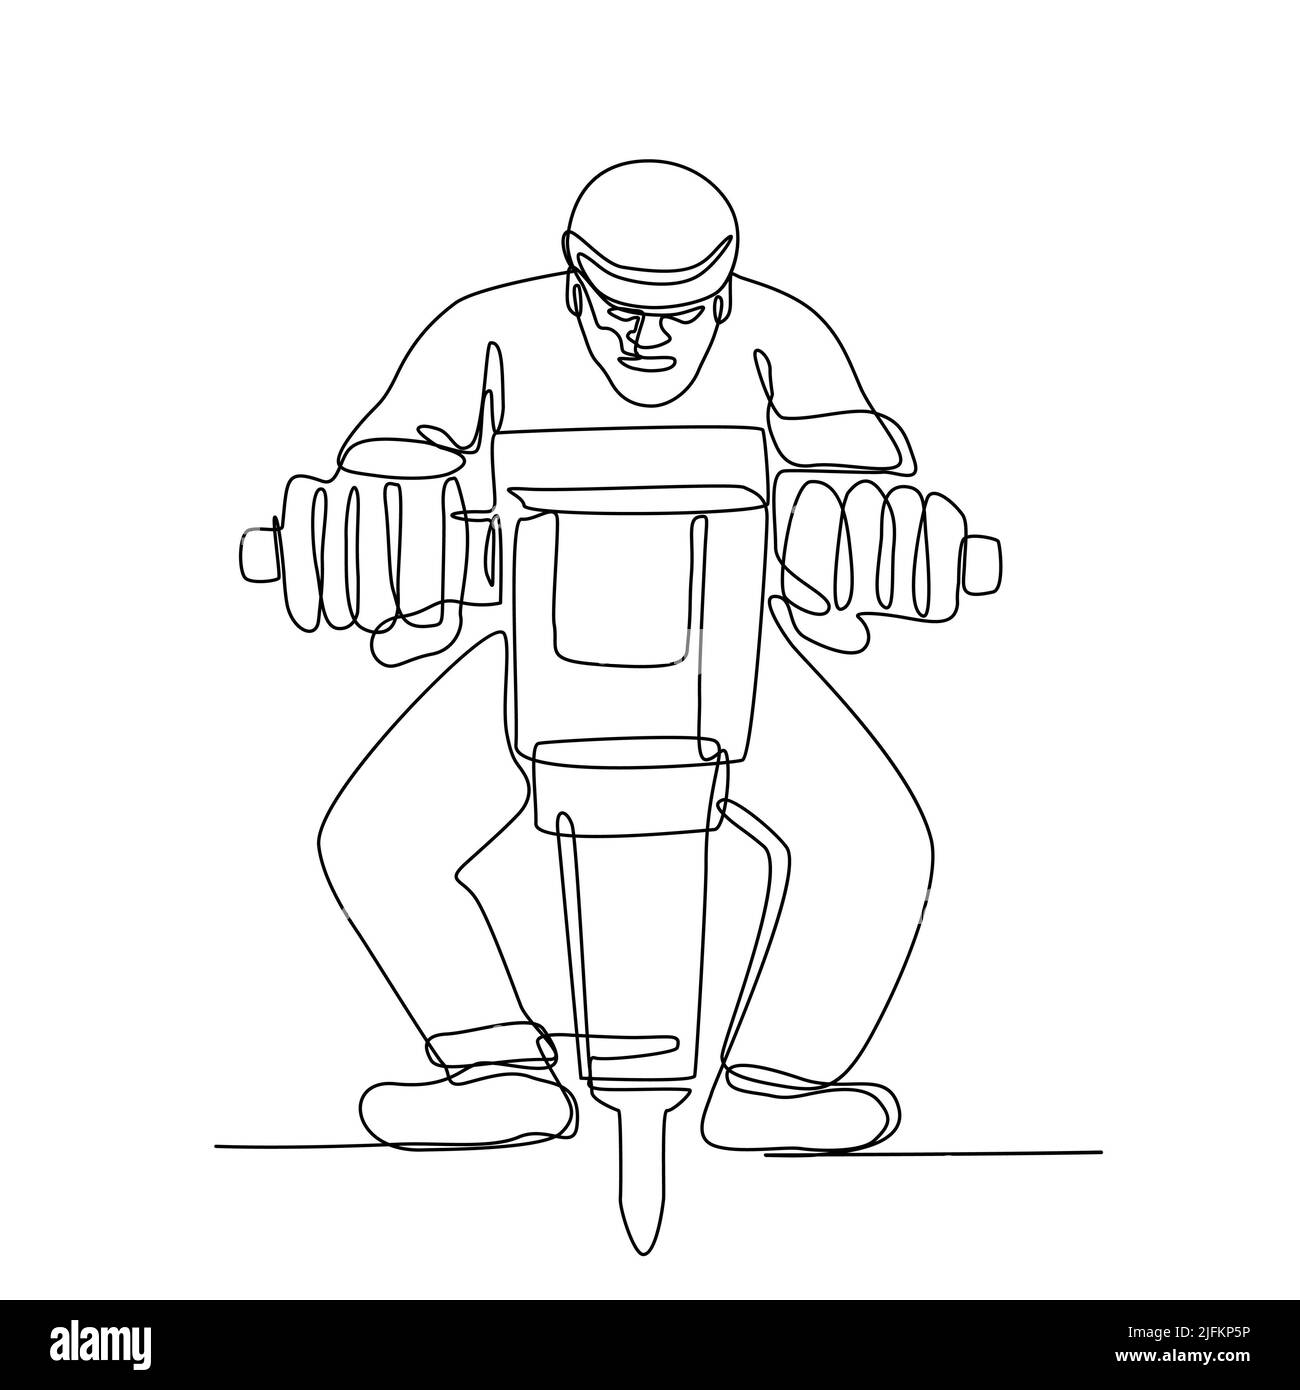 Continuous line illustration of construction worker with jackhammer, a portable pneumatic or electro-mechanical tool that is a hammer and drill done Stock Photo